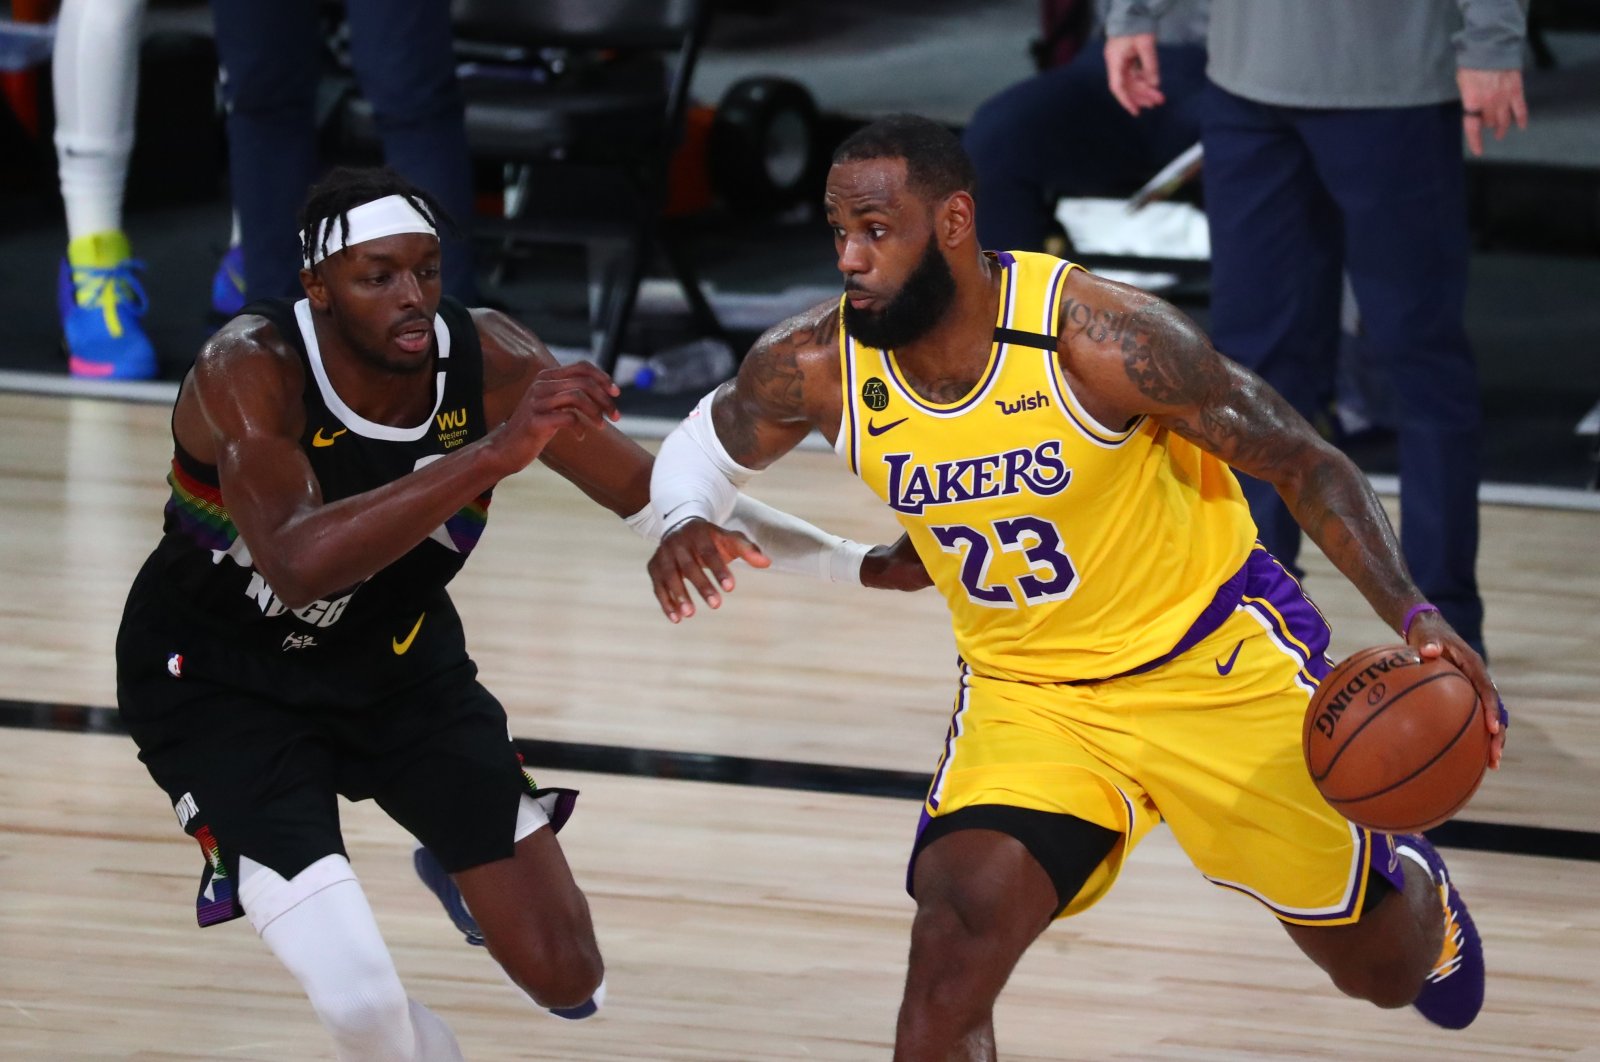 Denver Nuggets forward Jerami Grant (L) tries to stop Los Angeles Lakers forward LeBron James (R) from driving the ball around him during Game 4 of the NBA Western Conference Finals, Lake Buena Vista, Florida, Sept. 24, 2020. (Reuters Photo)